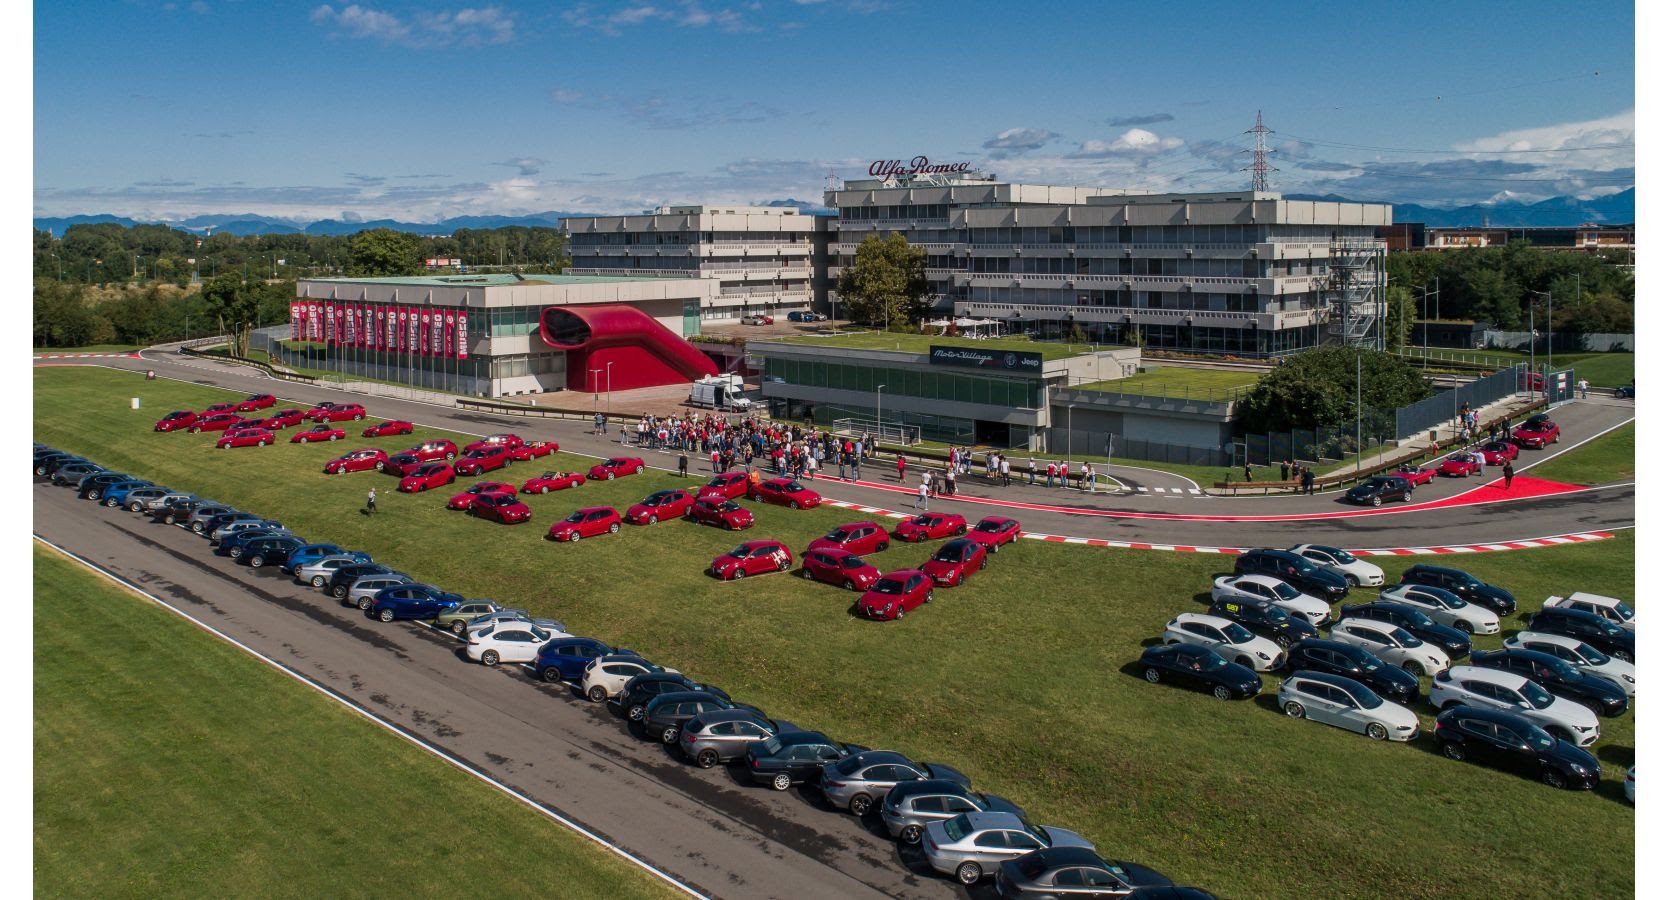 Alfa Romeo enthusiasts display their cars outside the Alfa Romeo museum in Arese